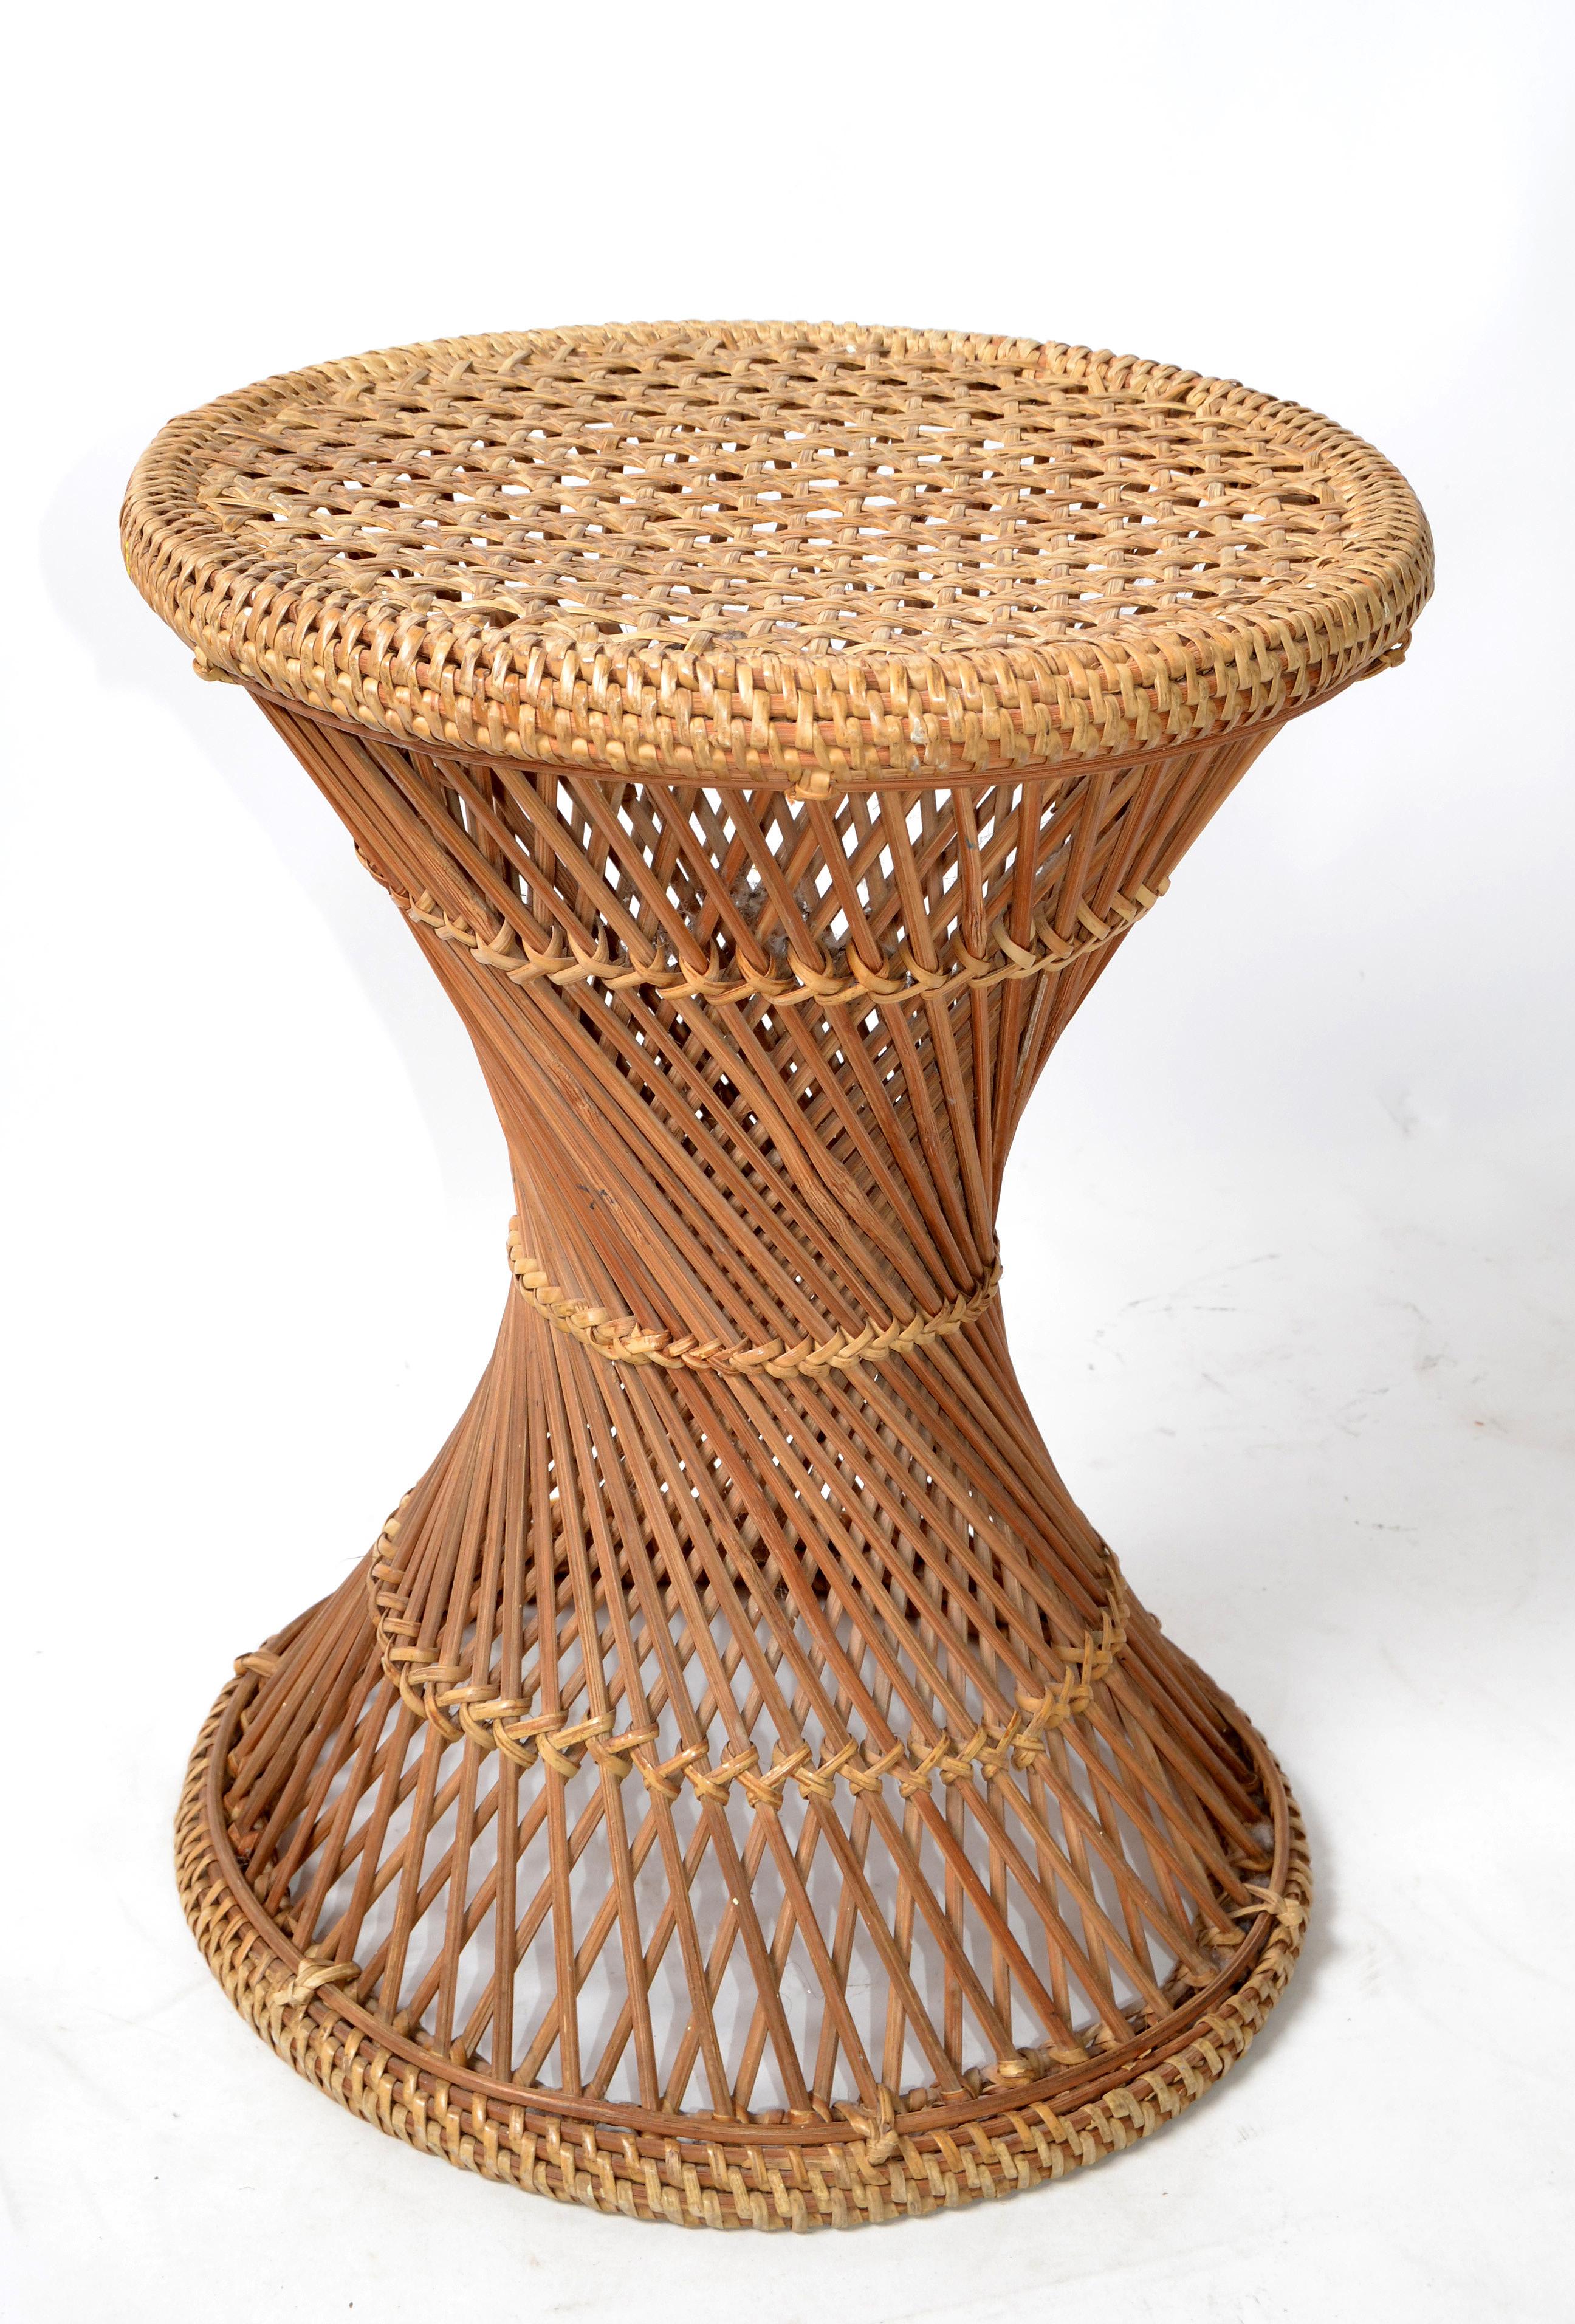 All handwoven wicker and rattan drum table, side table, drink table or stool in Bohemian period style.
Top diameter measures: 13.75 inches.
Height: 18 inches.